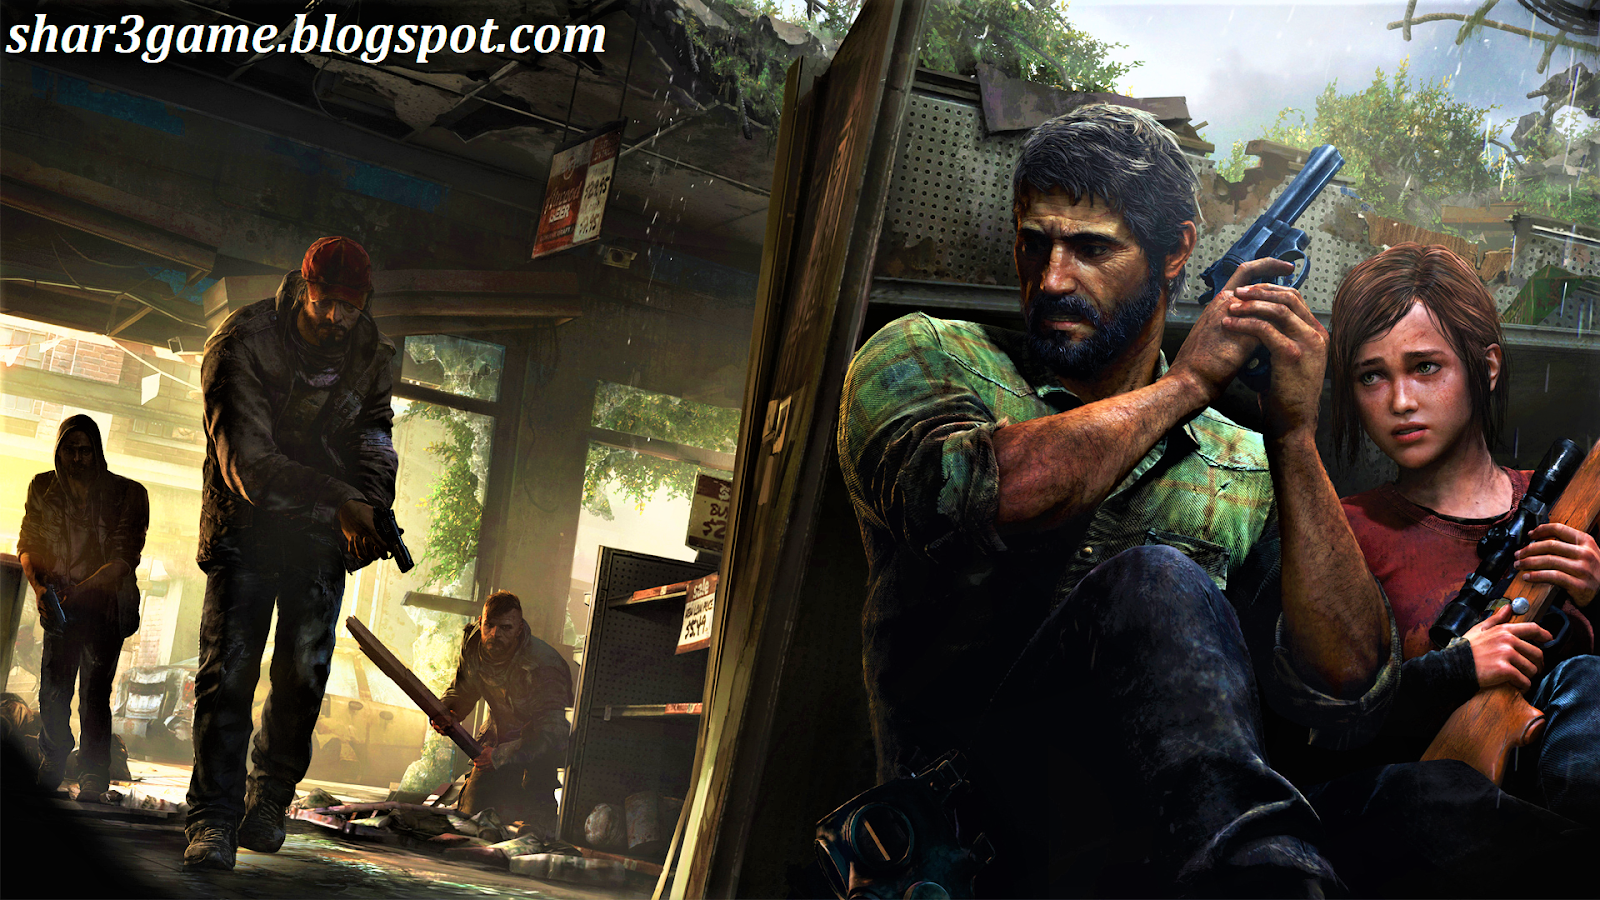 SHAR3GAME - Free Download Game + DLC PKG PS3: The Last of Us™ +